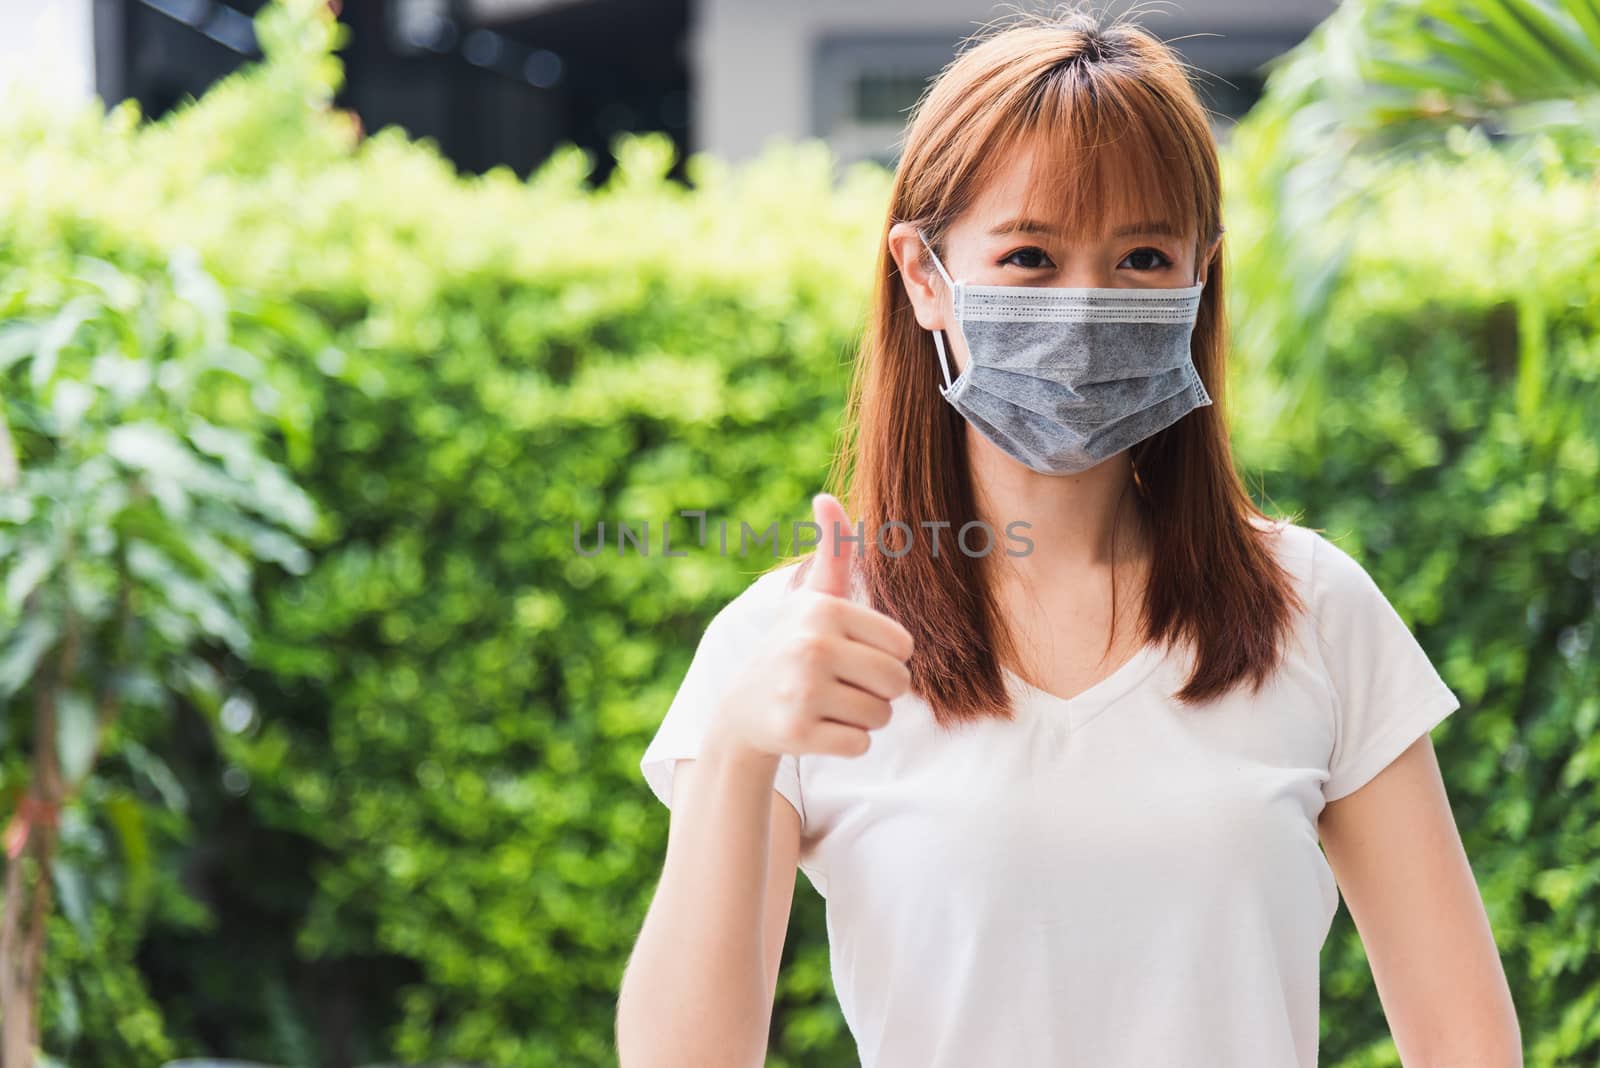 Asian young woman wearing face mask protective outdoor under quarantine pandemic coronavirus COVID-19 on green nature background